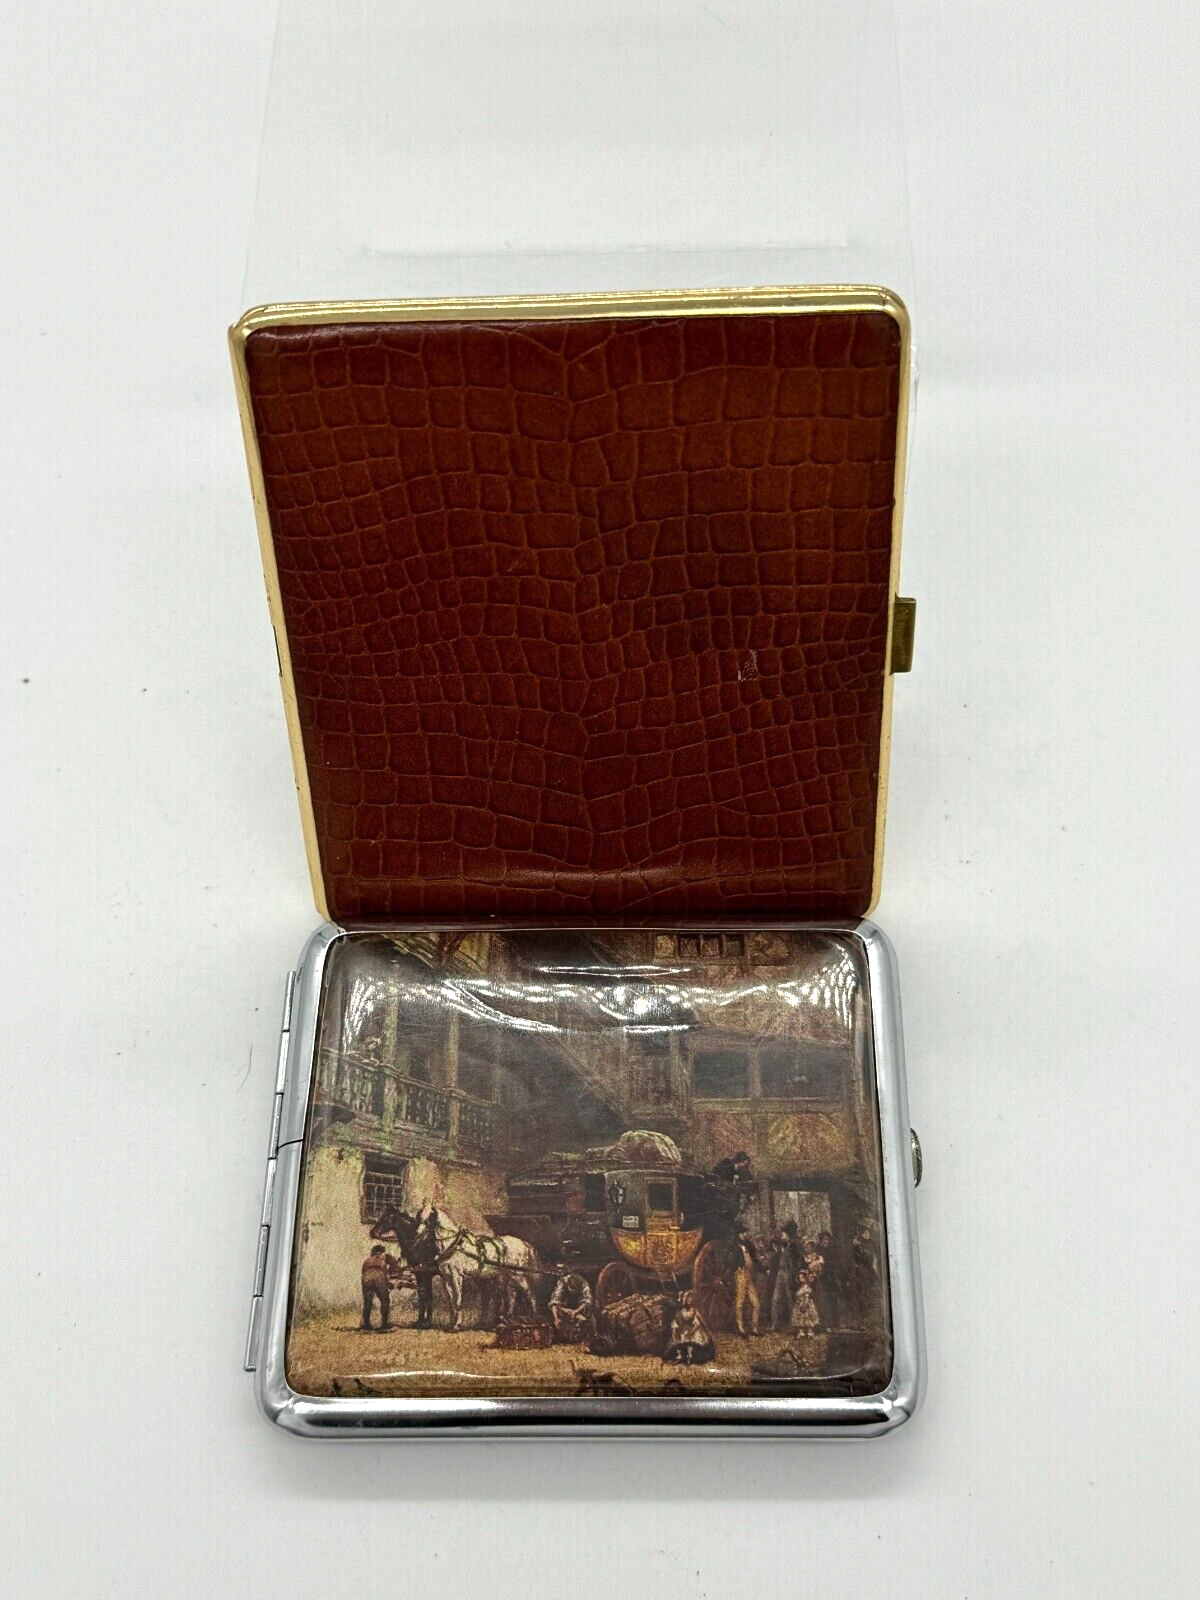 2 Vintage Collectable English Made Cigarette Cases